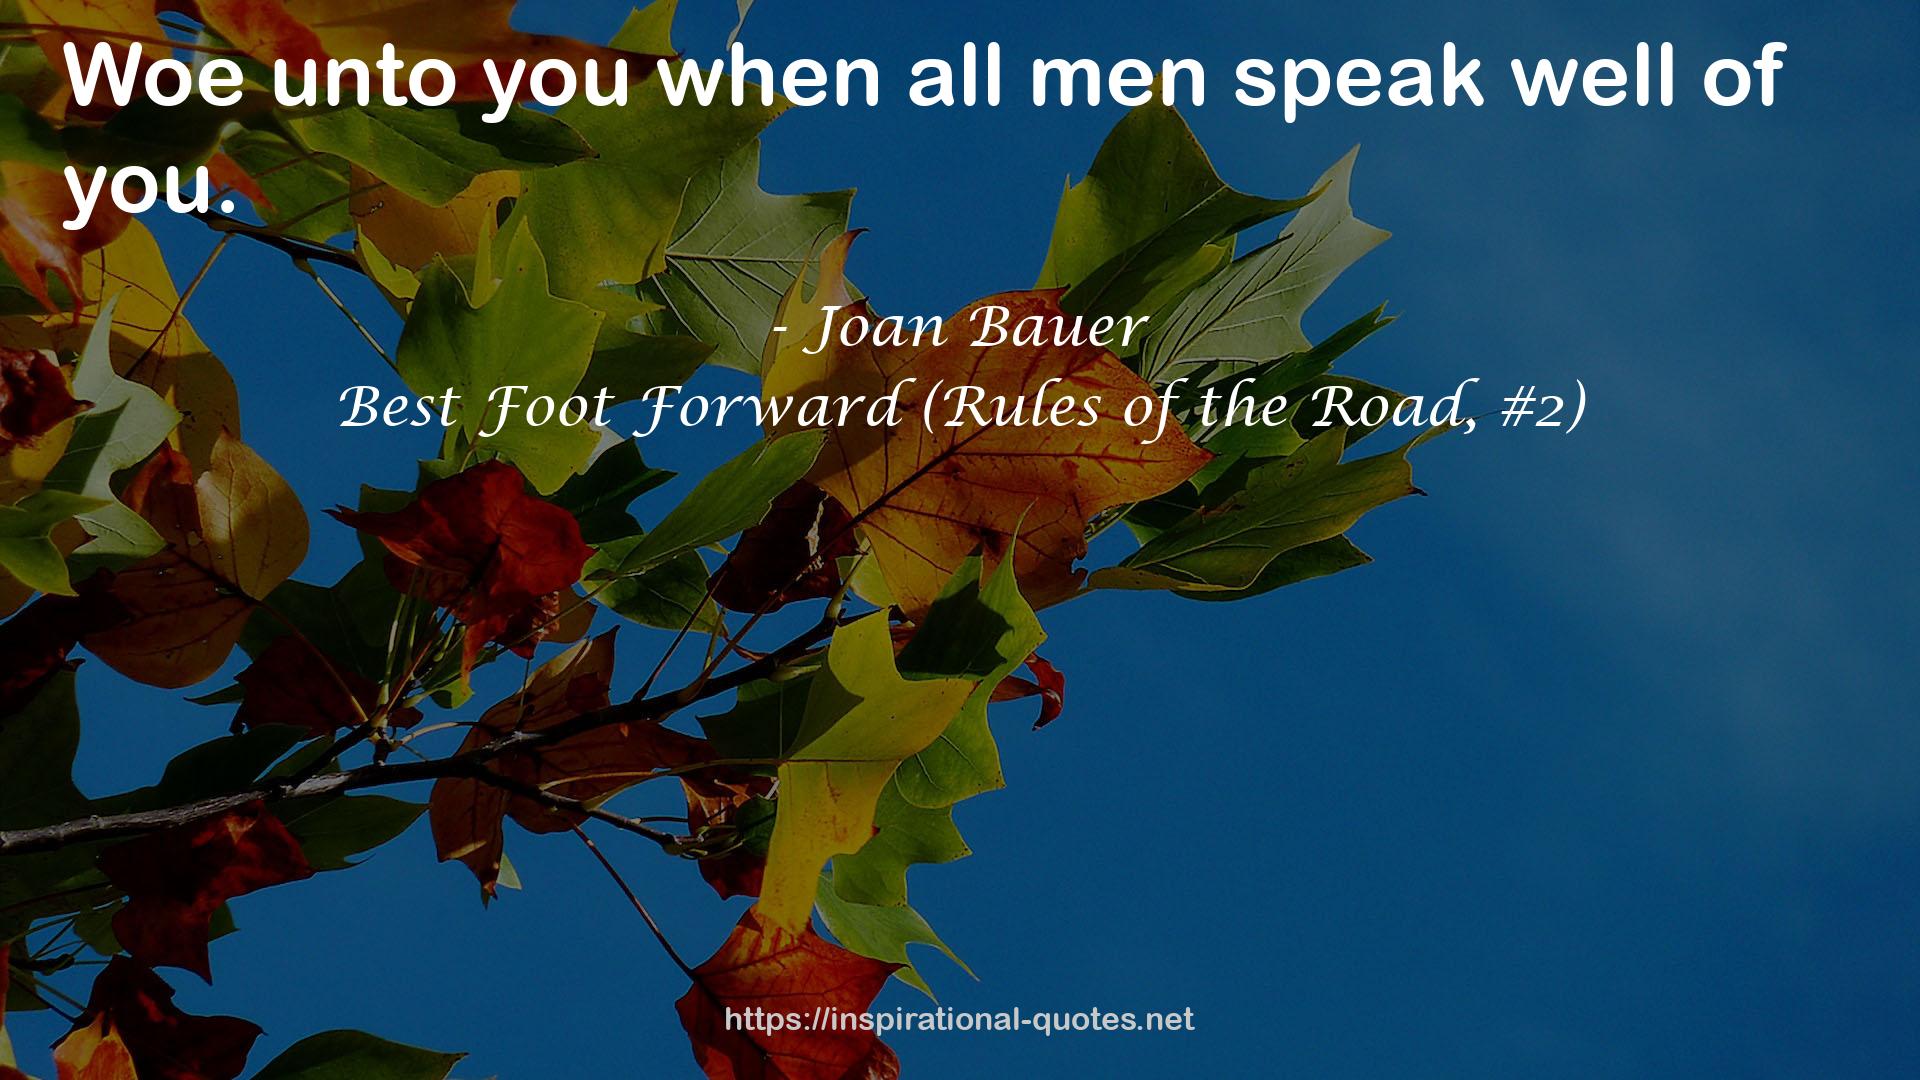 Best Foot Forward (Rules of the Road, #2) QUOTES